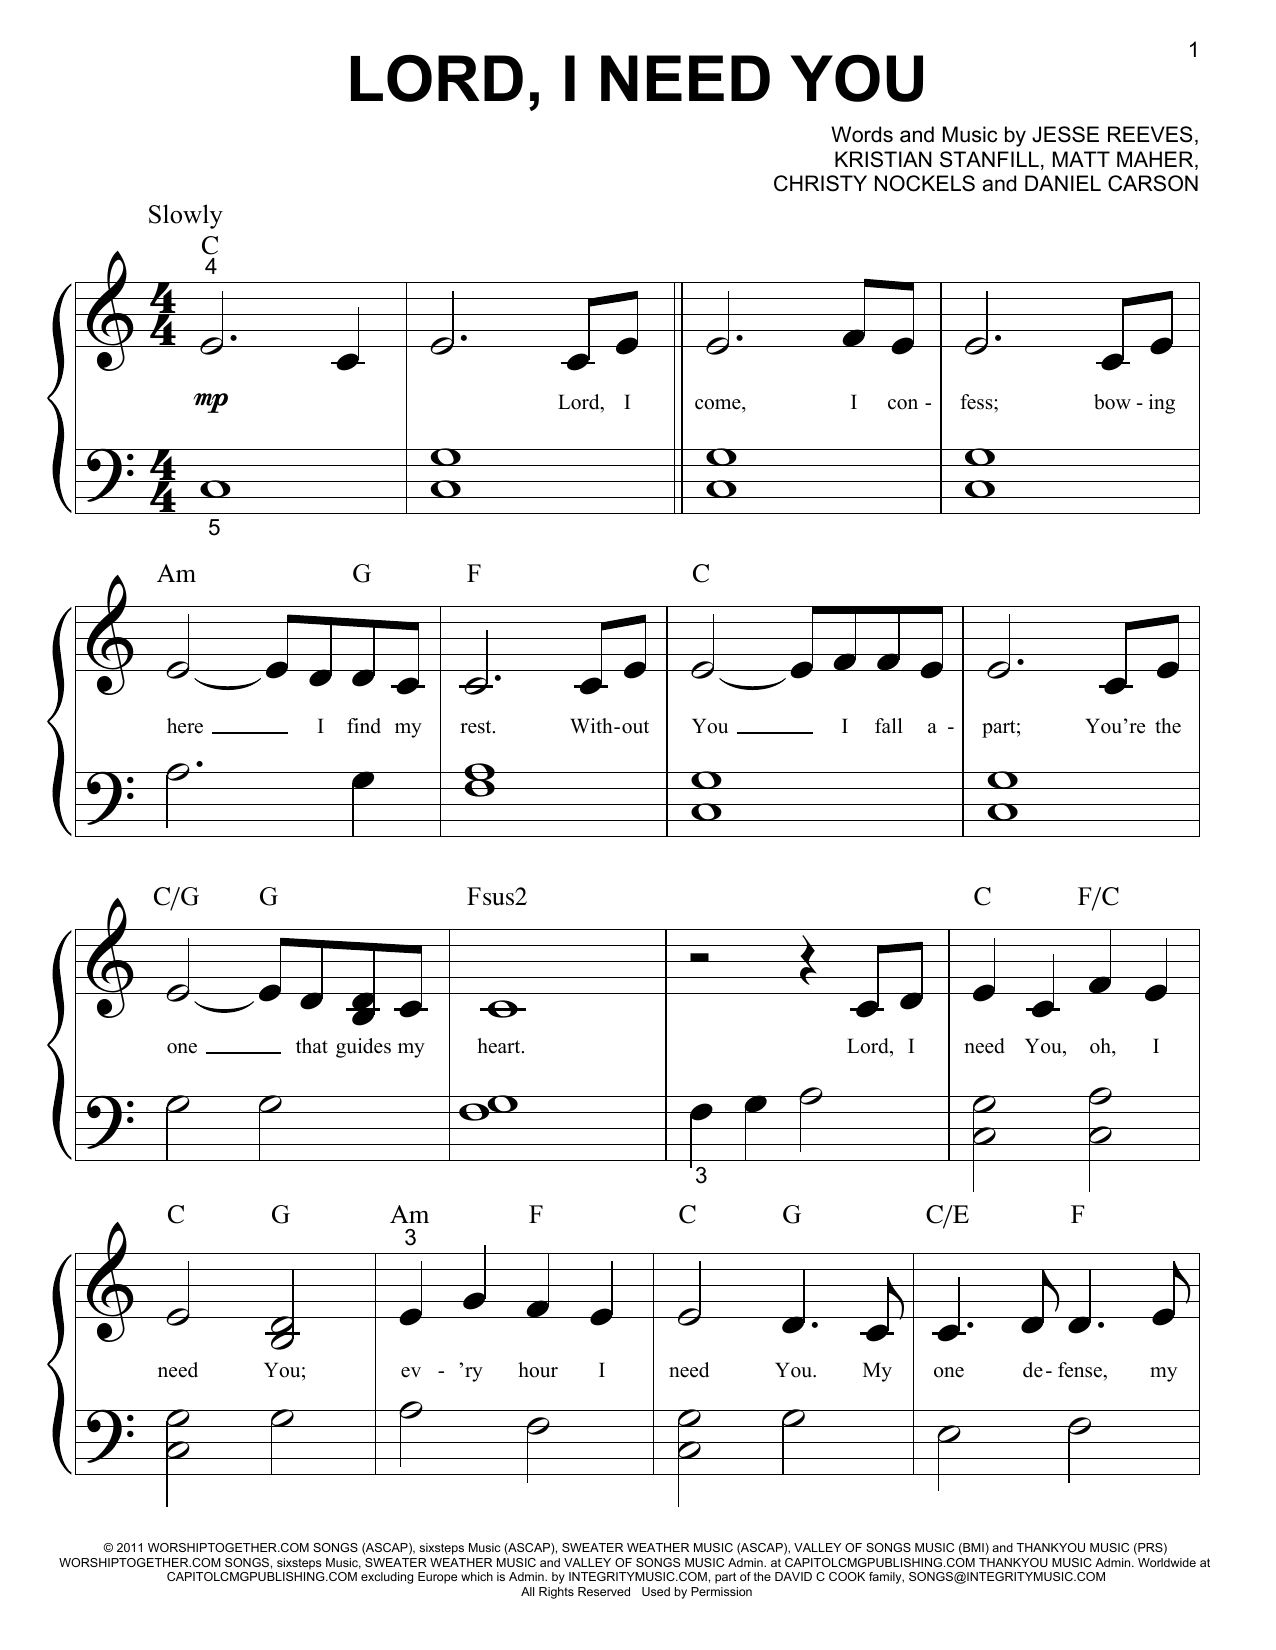 Download Passion Lord, I Need You Sheet Music